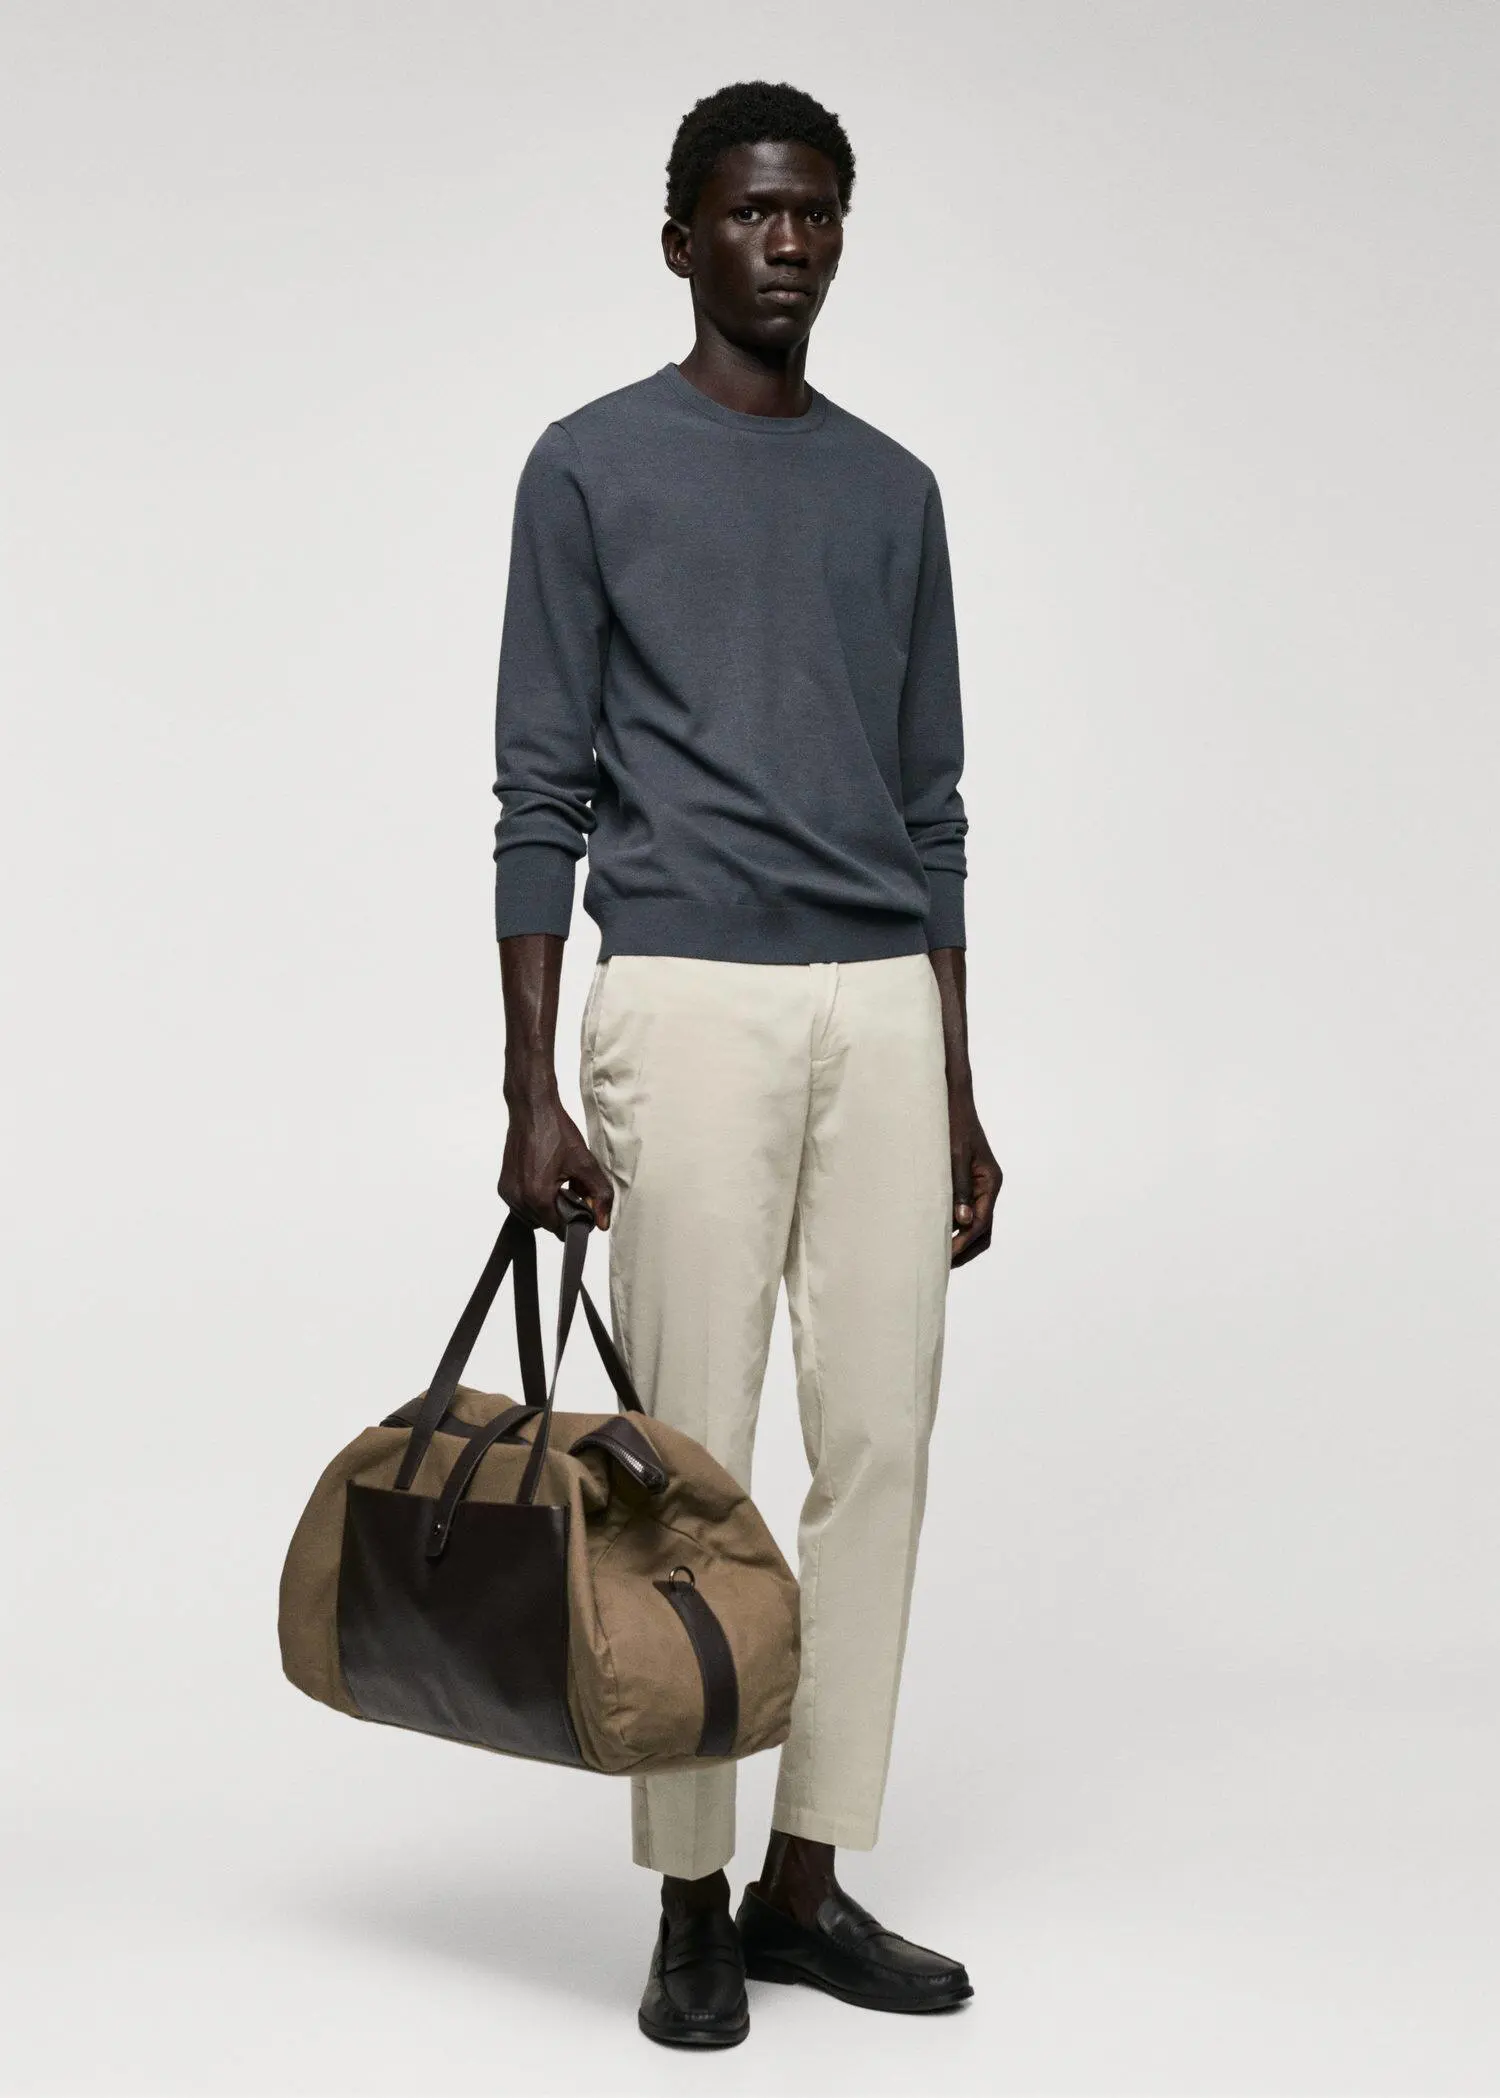 Mango Fine-knit sweater. a man holding a duffel bag in front of a white wall. 